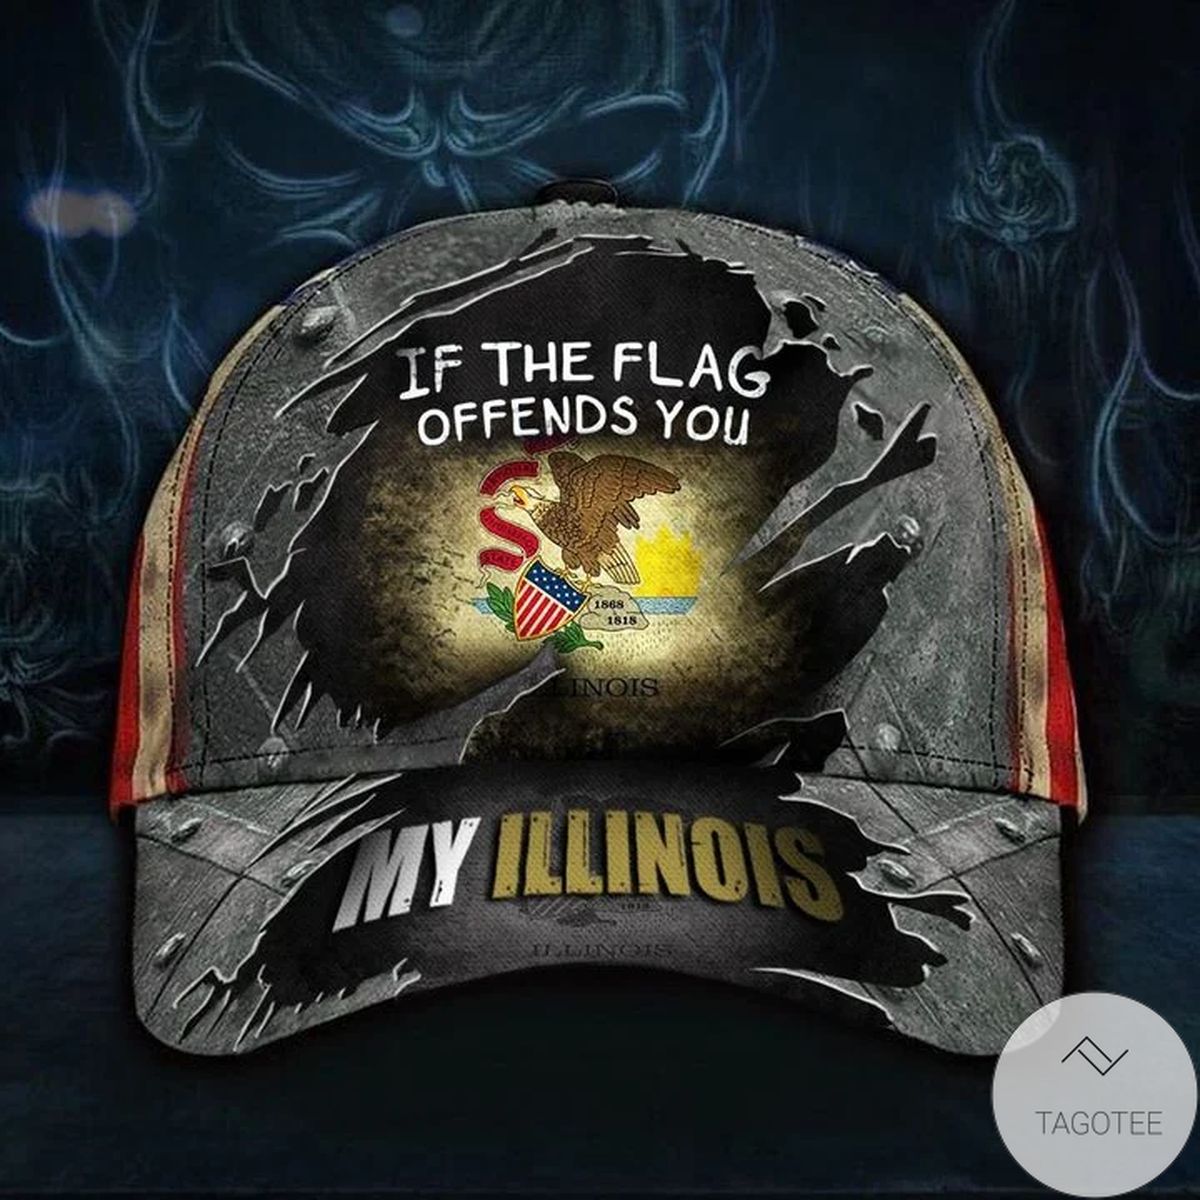 If The Flag Offends You My Illinois Hat Vintage USA Flag Baseball Cap Unique Gift For Men